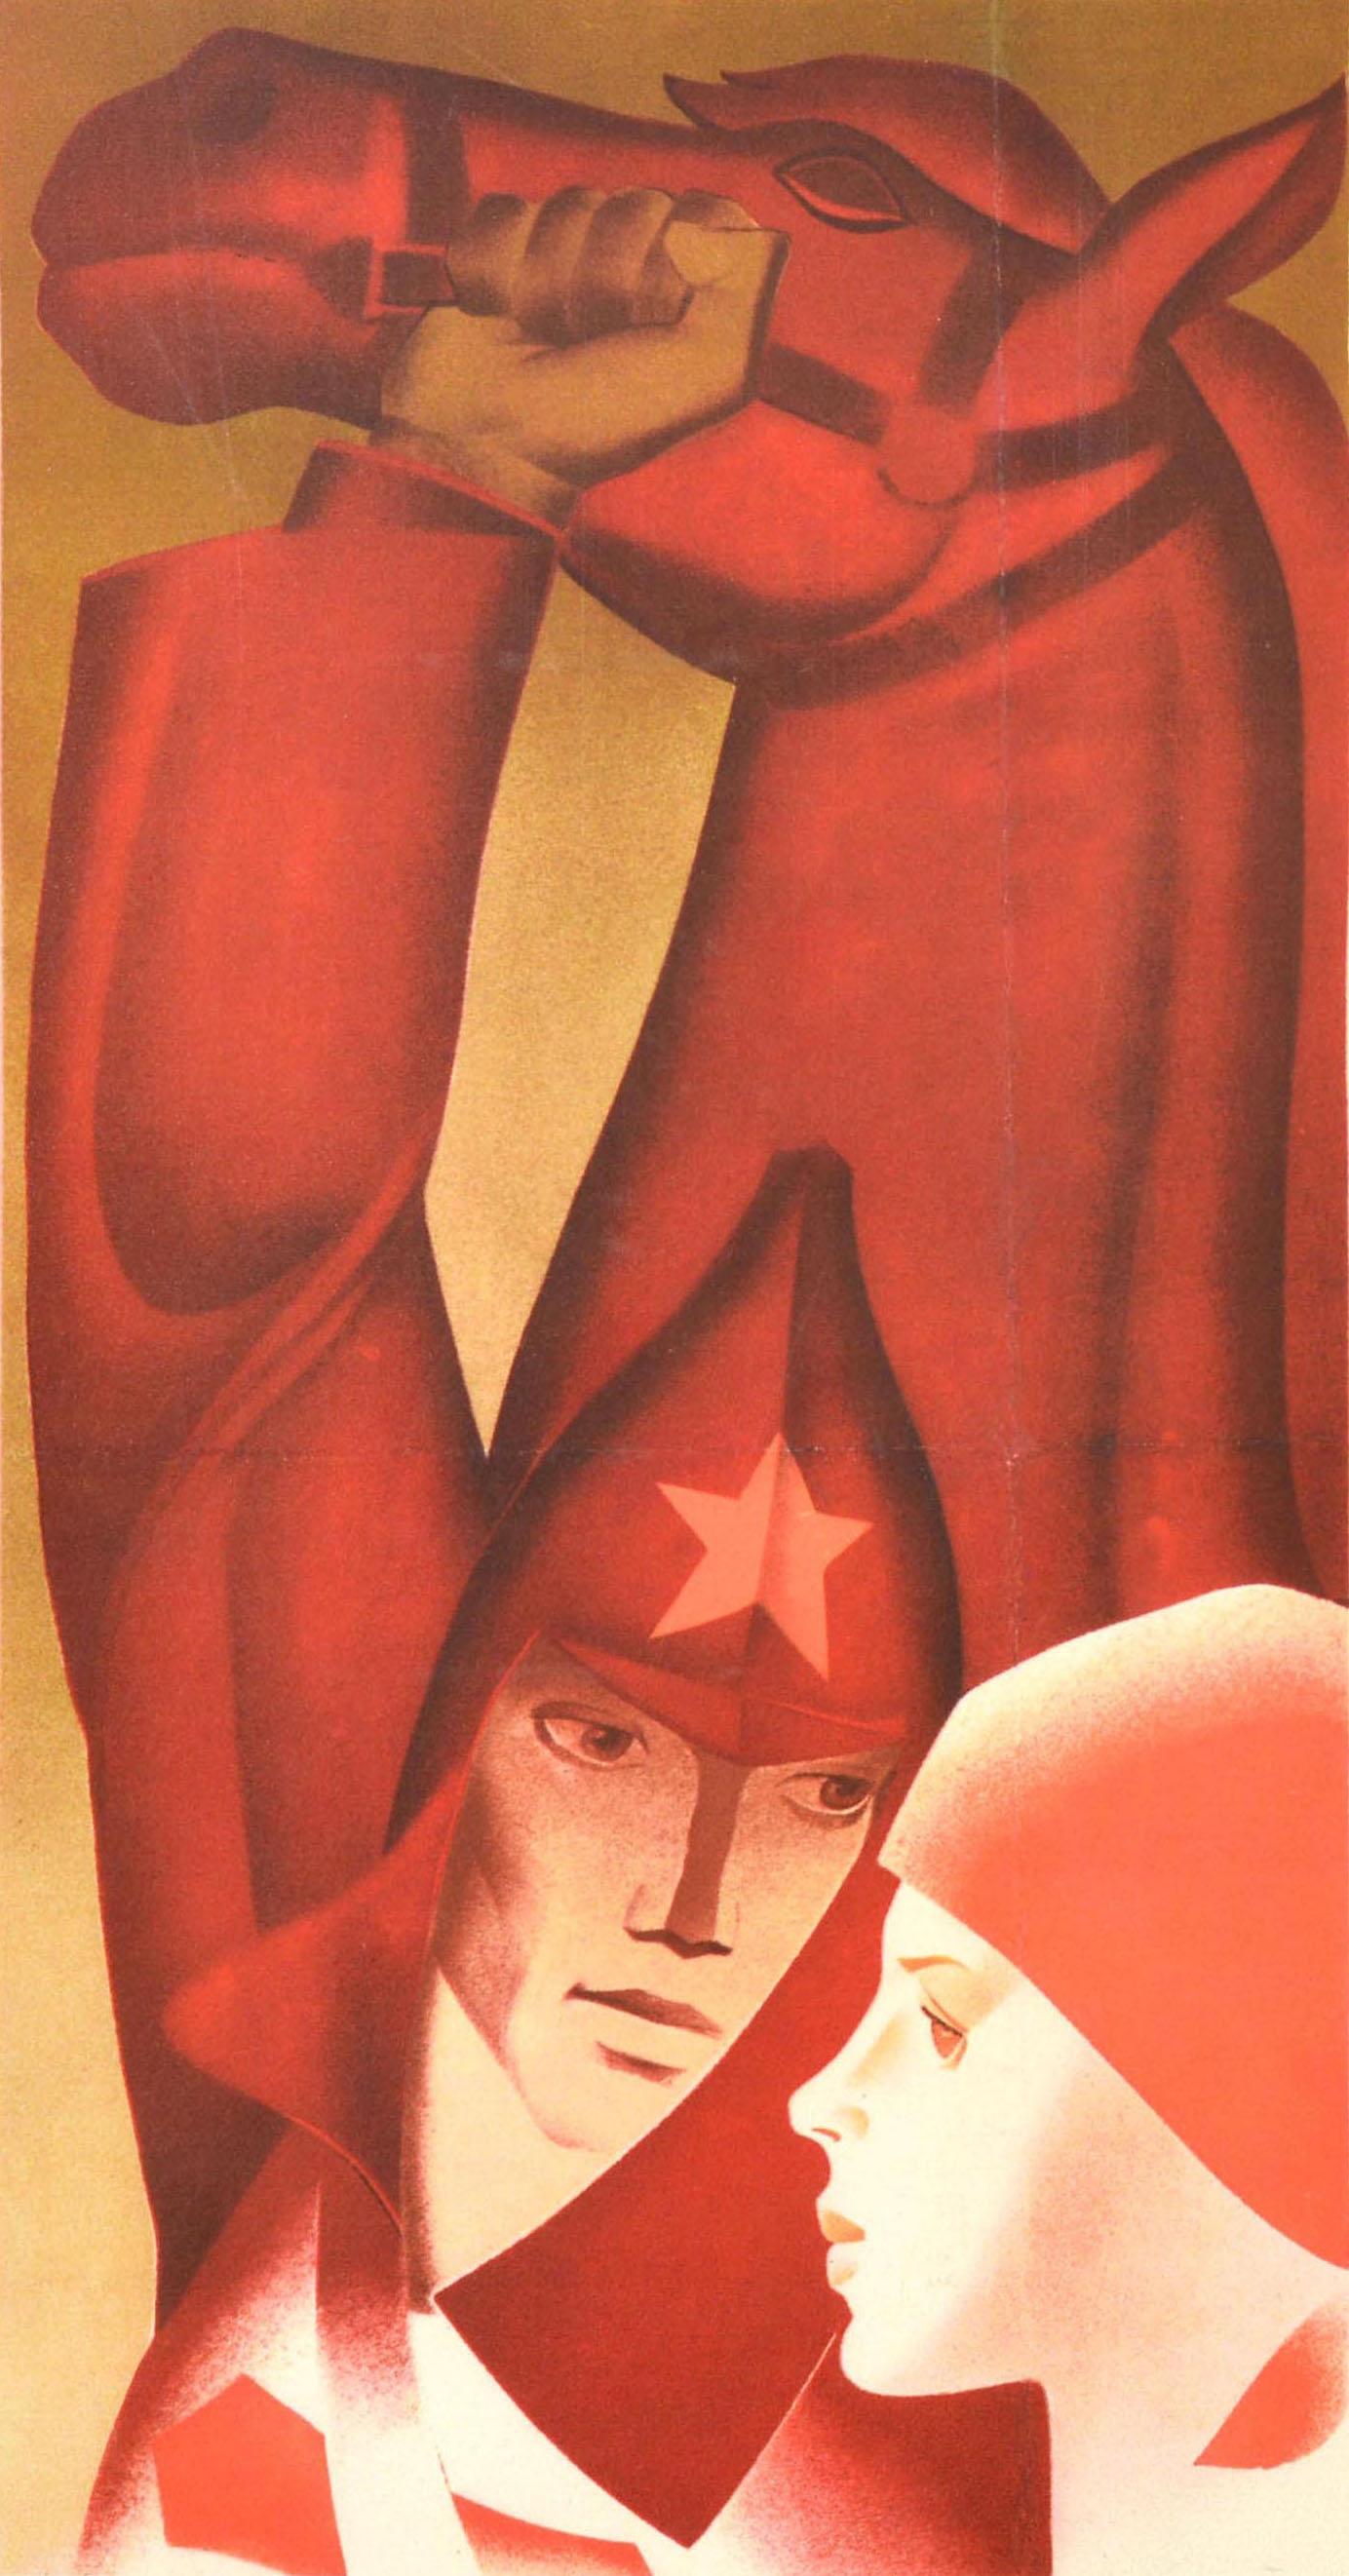 Original Vintage Soviet Propaganda Poster Our Women Are With Us USSR Army Design - Print by Unknown